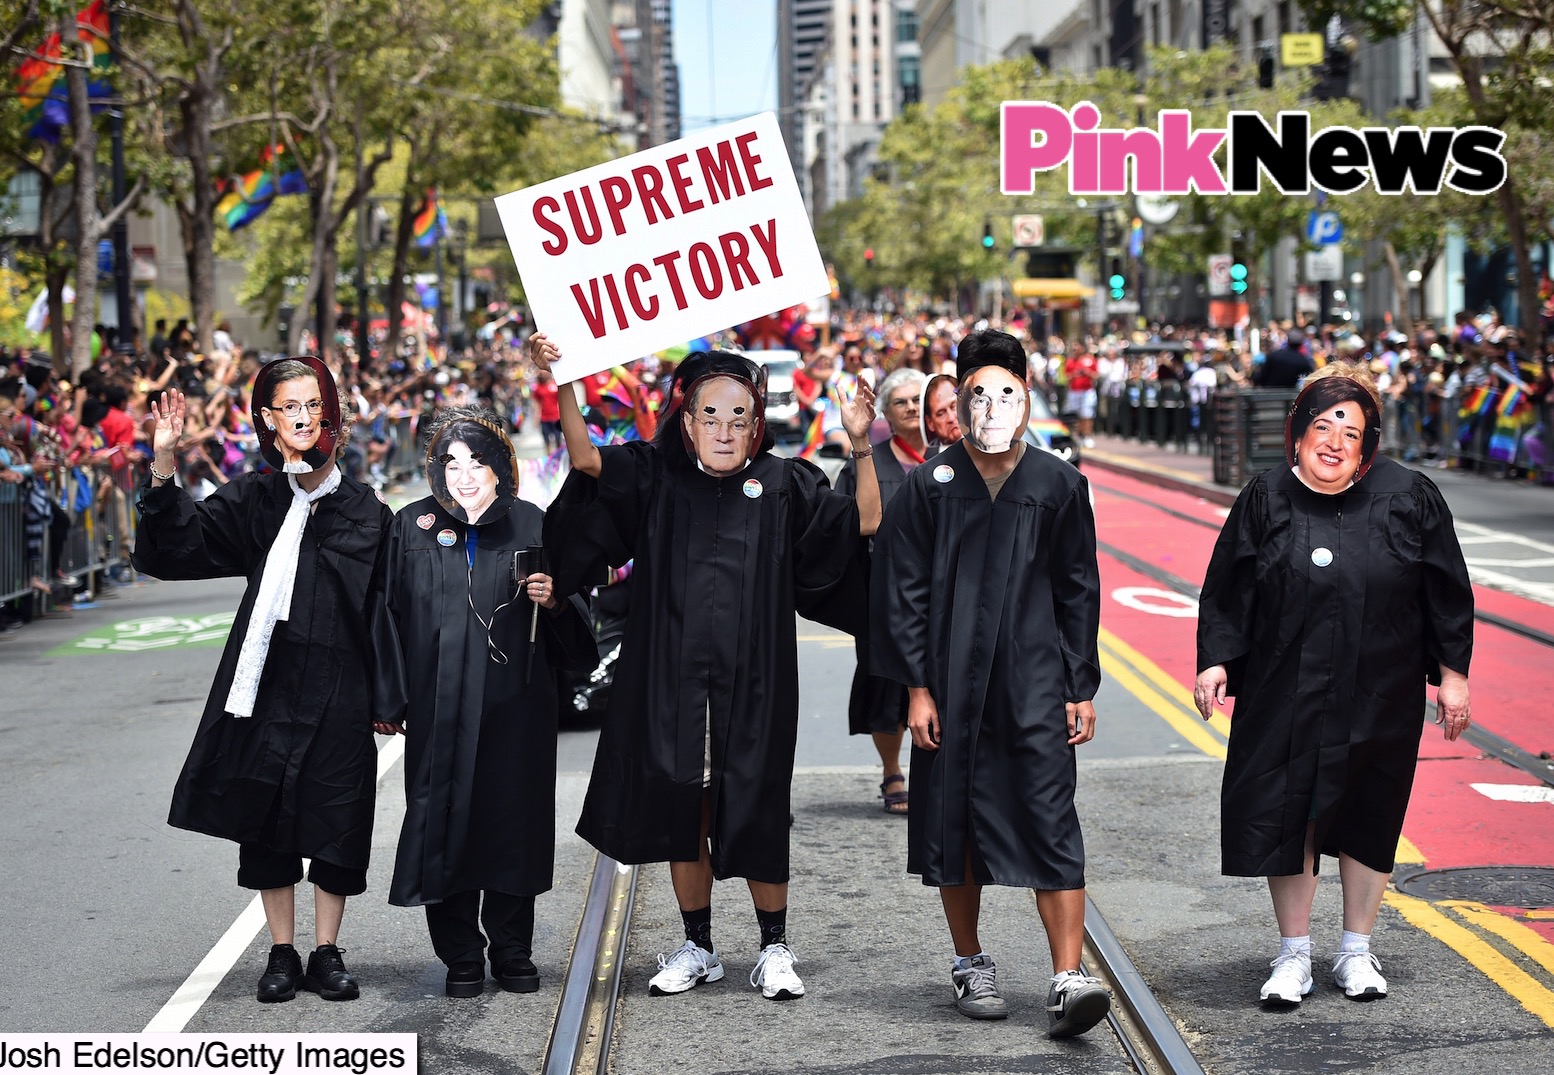 People dressed as United States Supreme Court Justices march along Market Street during the annual Gay Pride parade in San Francisco, California on June 28, 2015, two days after  the US Supreme Court's landmark ruling legalizing same-sex marriage nationwide.    AFP PHOTO / JOSH EDELSON        (Photo credit should read Josh Edelson/AFP/Getty Images)